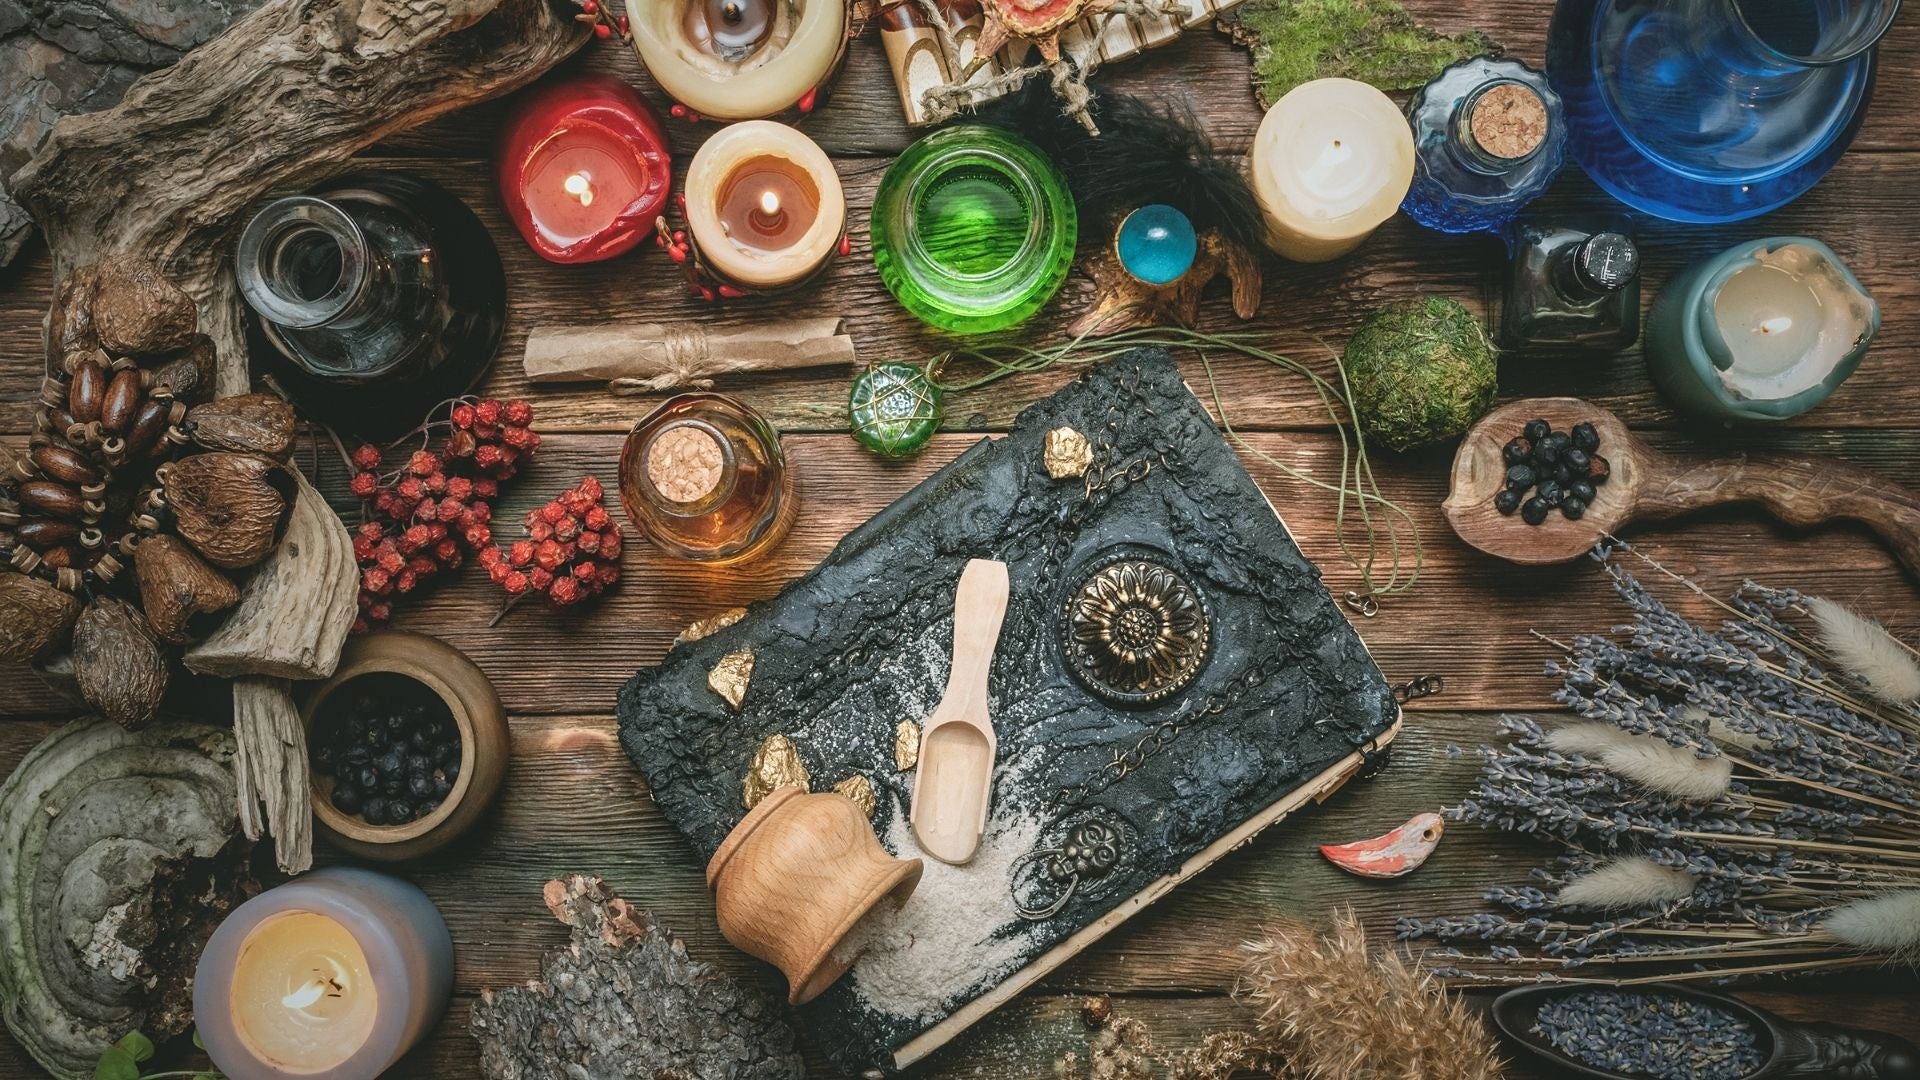 Image showing witchy tools, such as a spell book, herbs, candles, and more. - The Call of the Craft